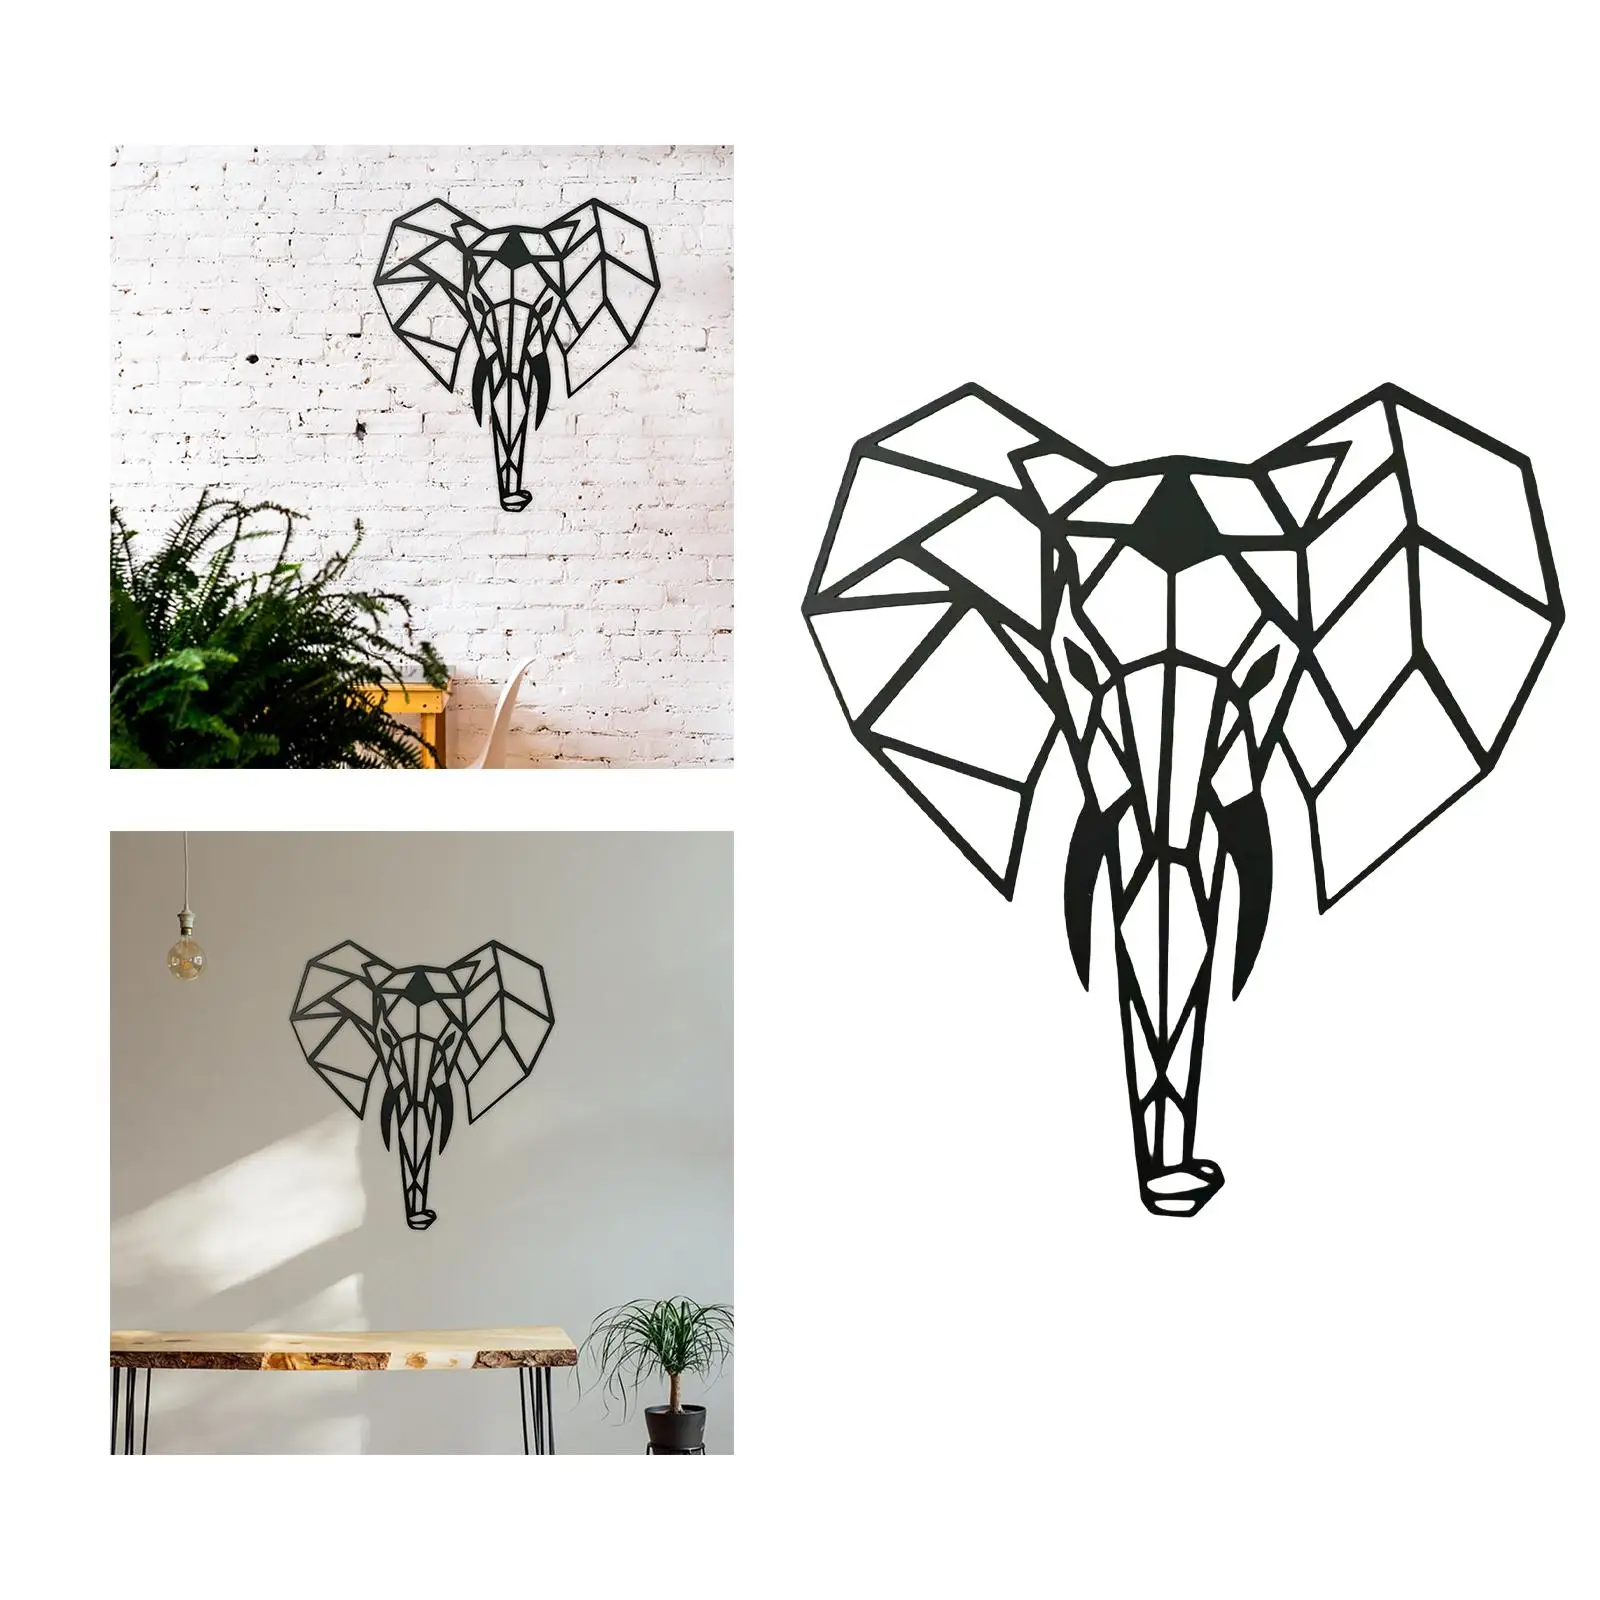 Metal Wall Art Decor Decorative Silhouette Animal Gifts Hanging Wall Decorations for Living Room Office Bar Cafe Restaurants